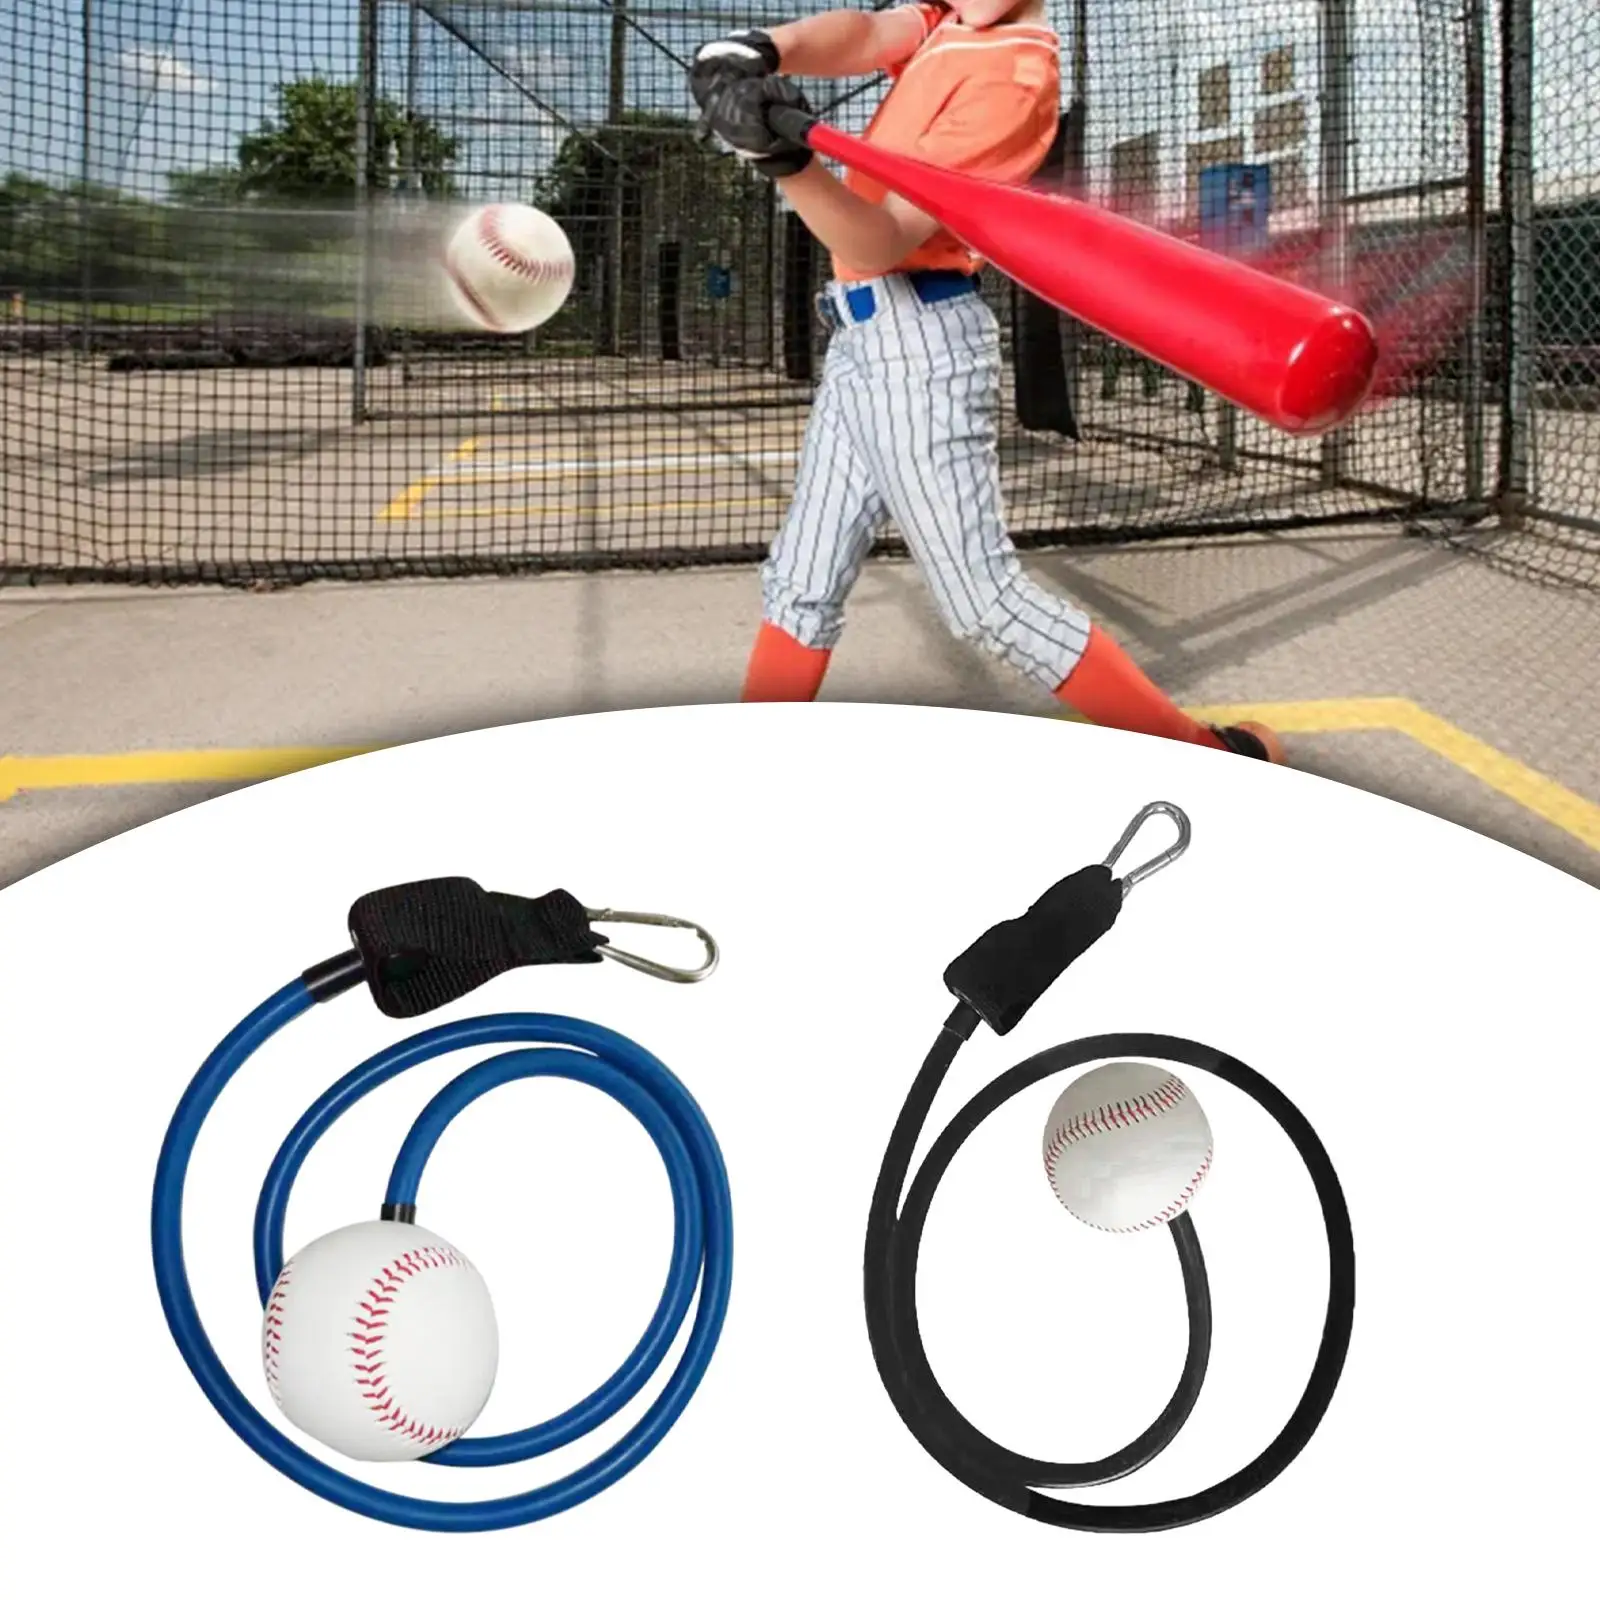 Baseball Pitching Bands Softball Training Aid Portable Elastic Band for Beginners Throwing Workout Stretch Arm Fitness Equipment